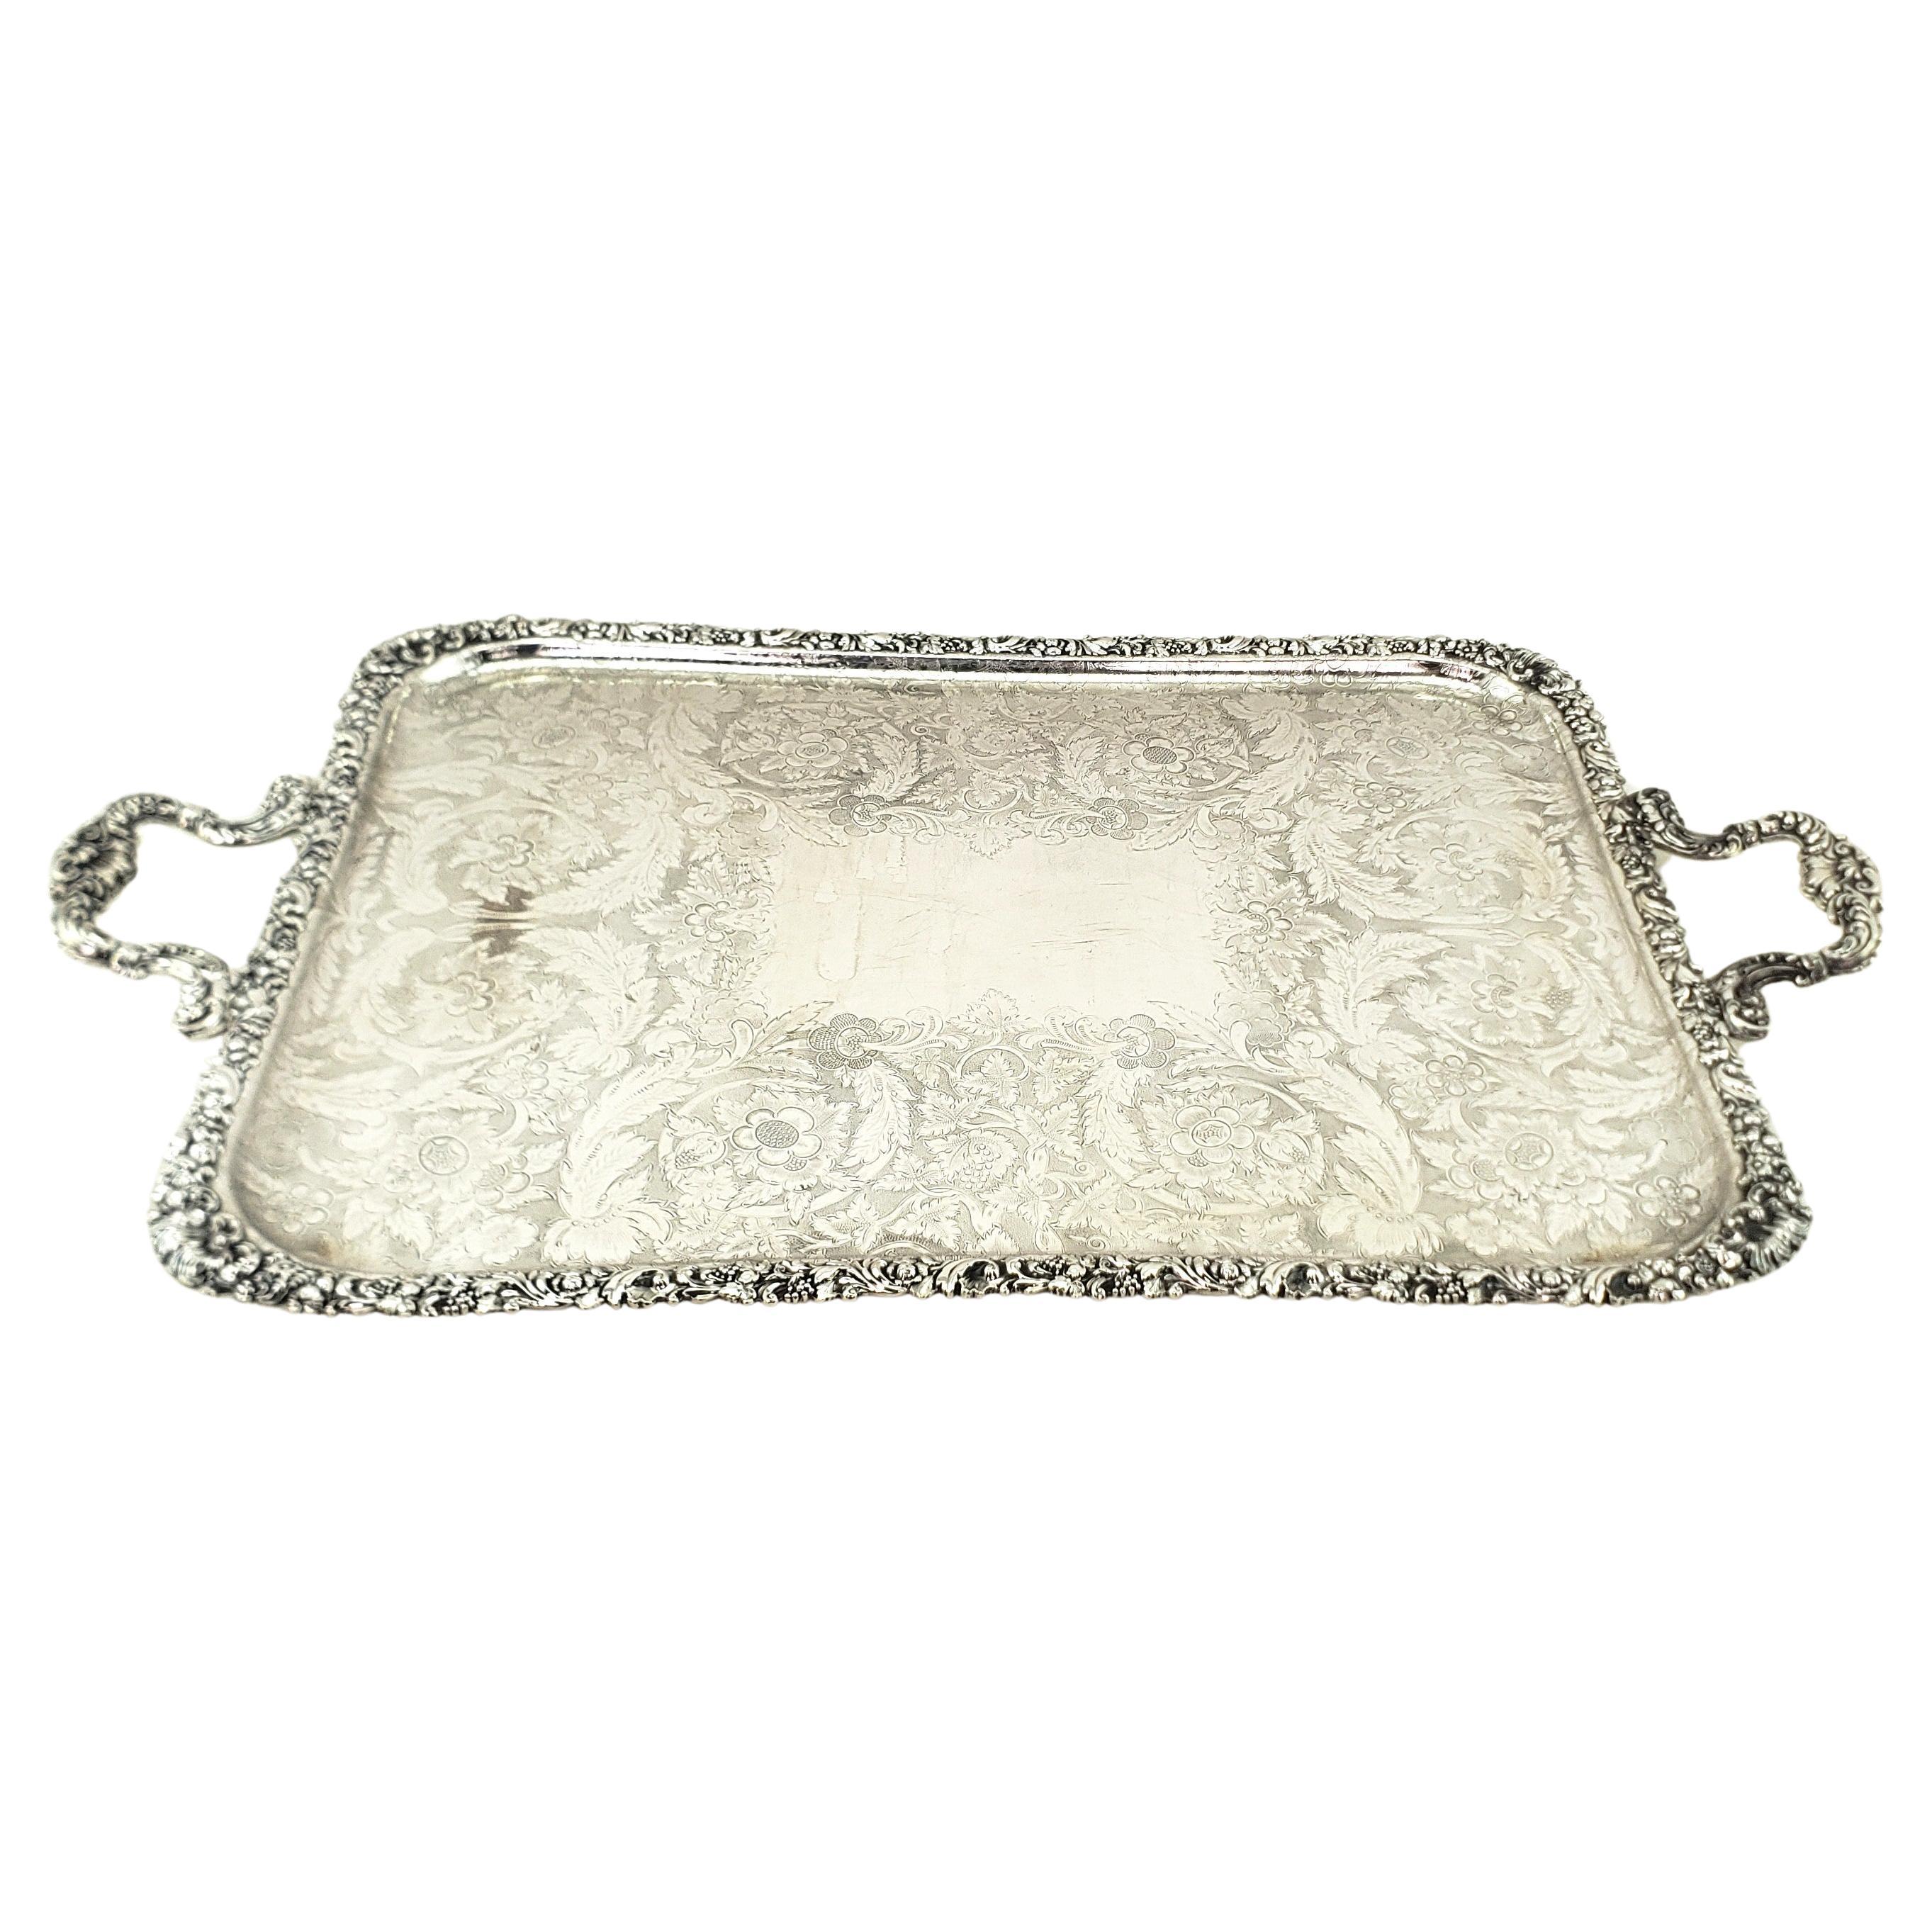 Large Antique Birks Silver Plated Serving Tray with Leaf & Berry Decoration For Sale